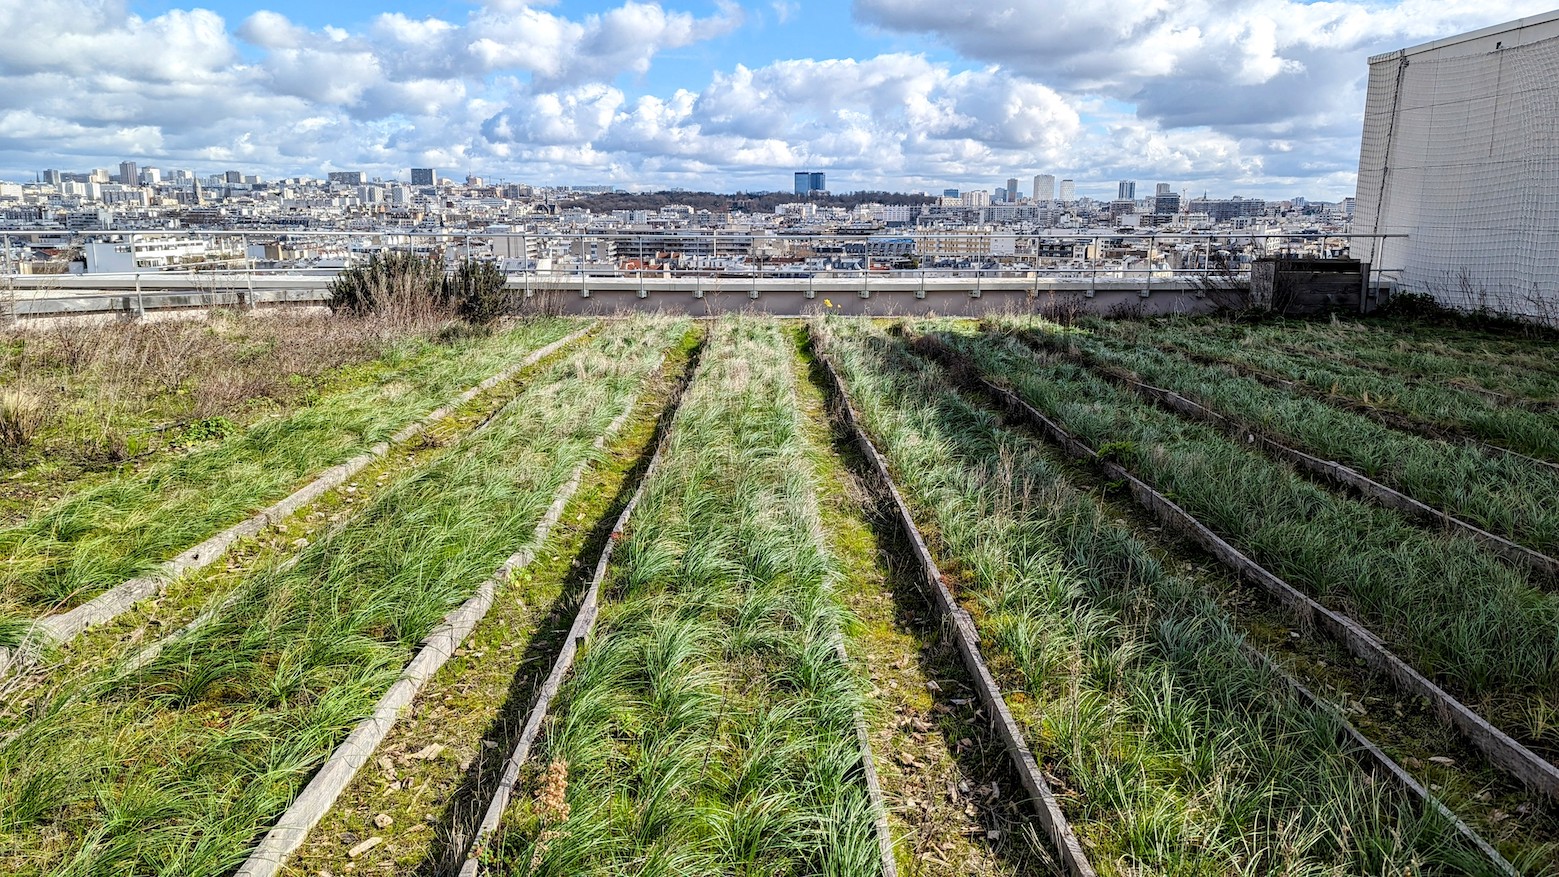 One of fours Parisian saffron farms on the roof terrace of the Bastille Opera in March.